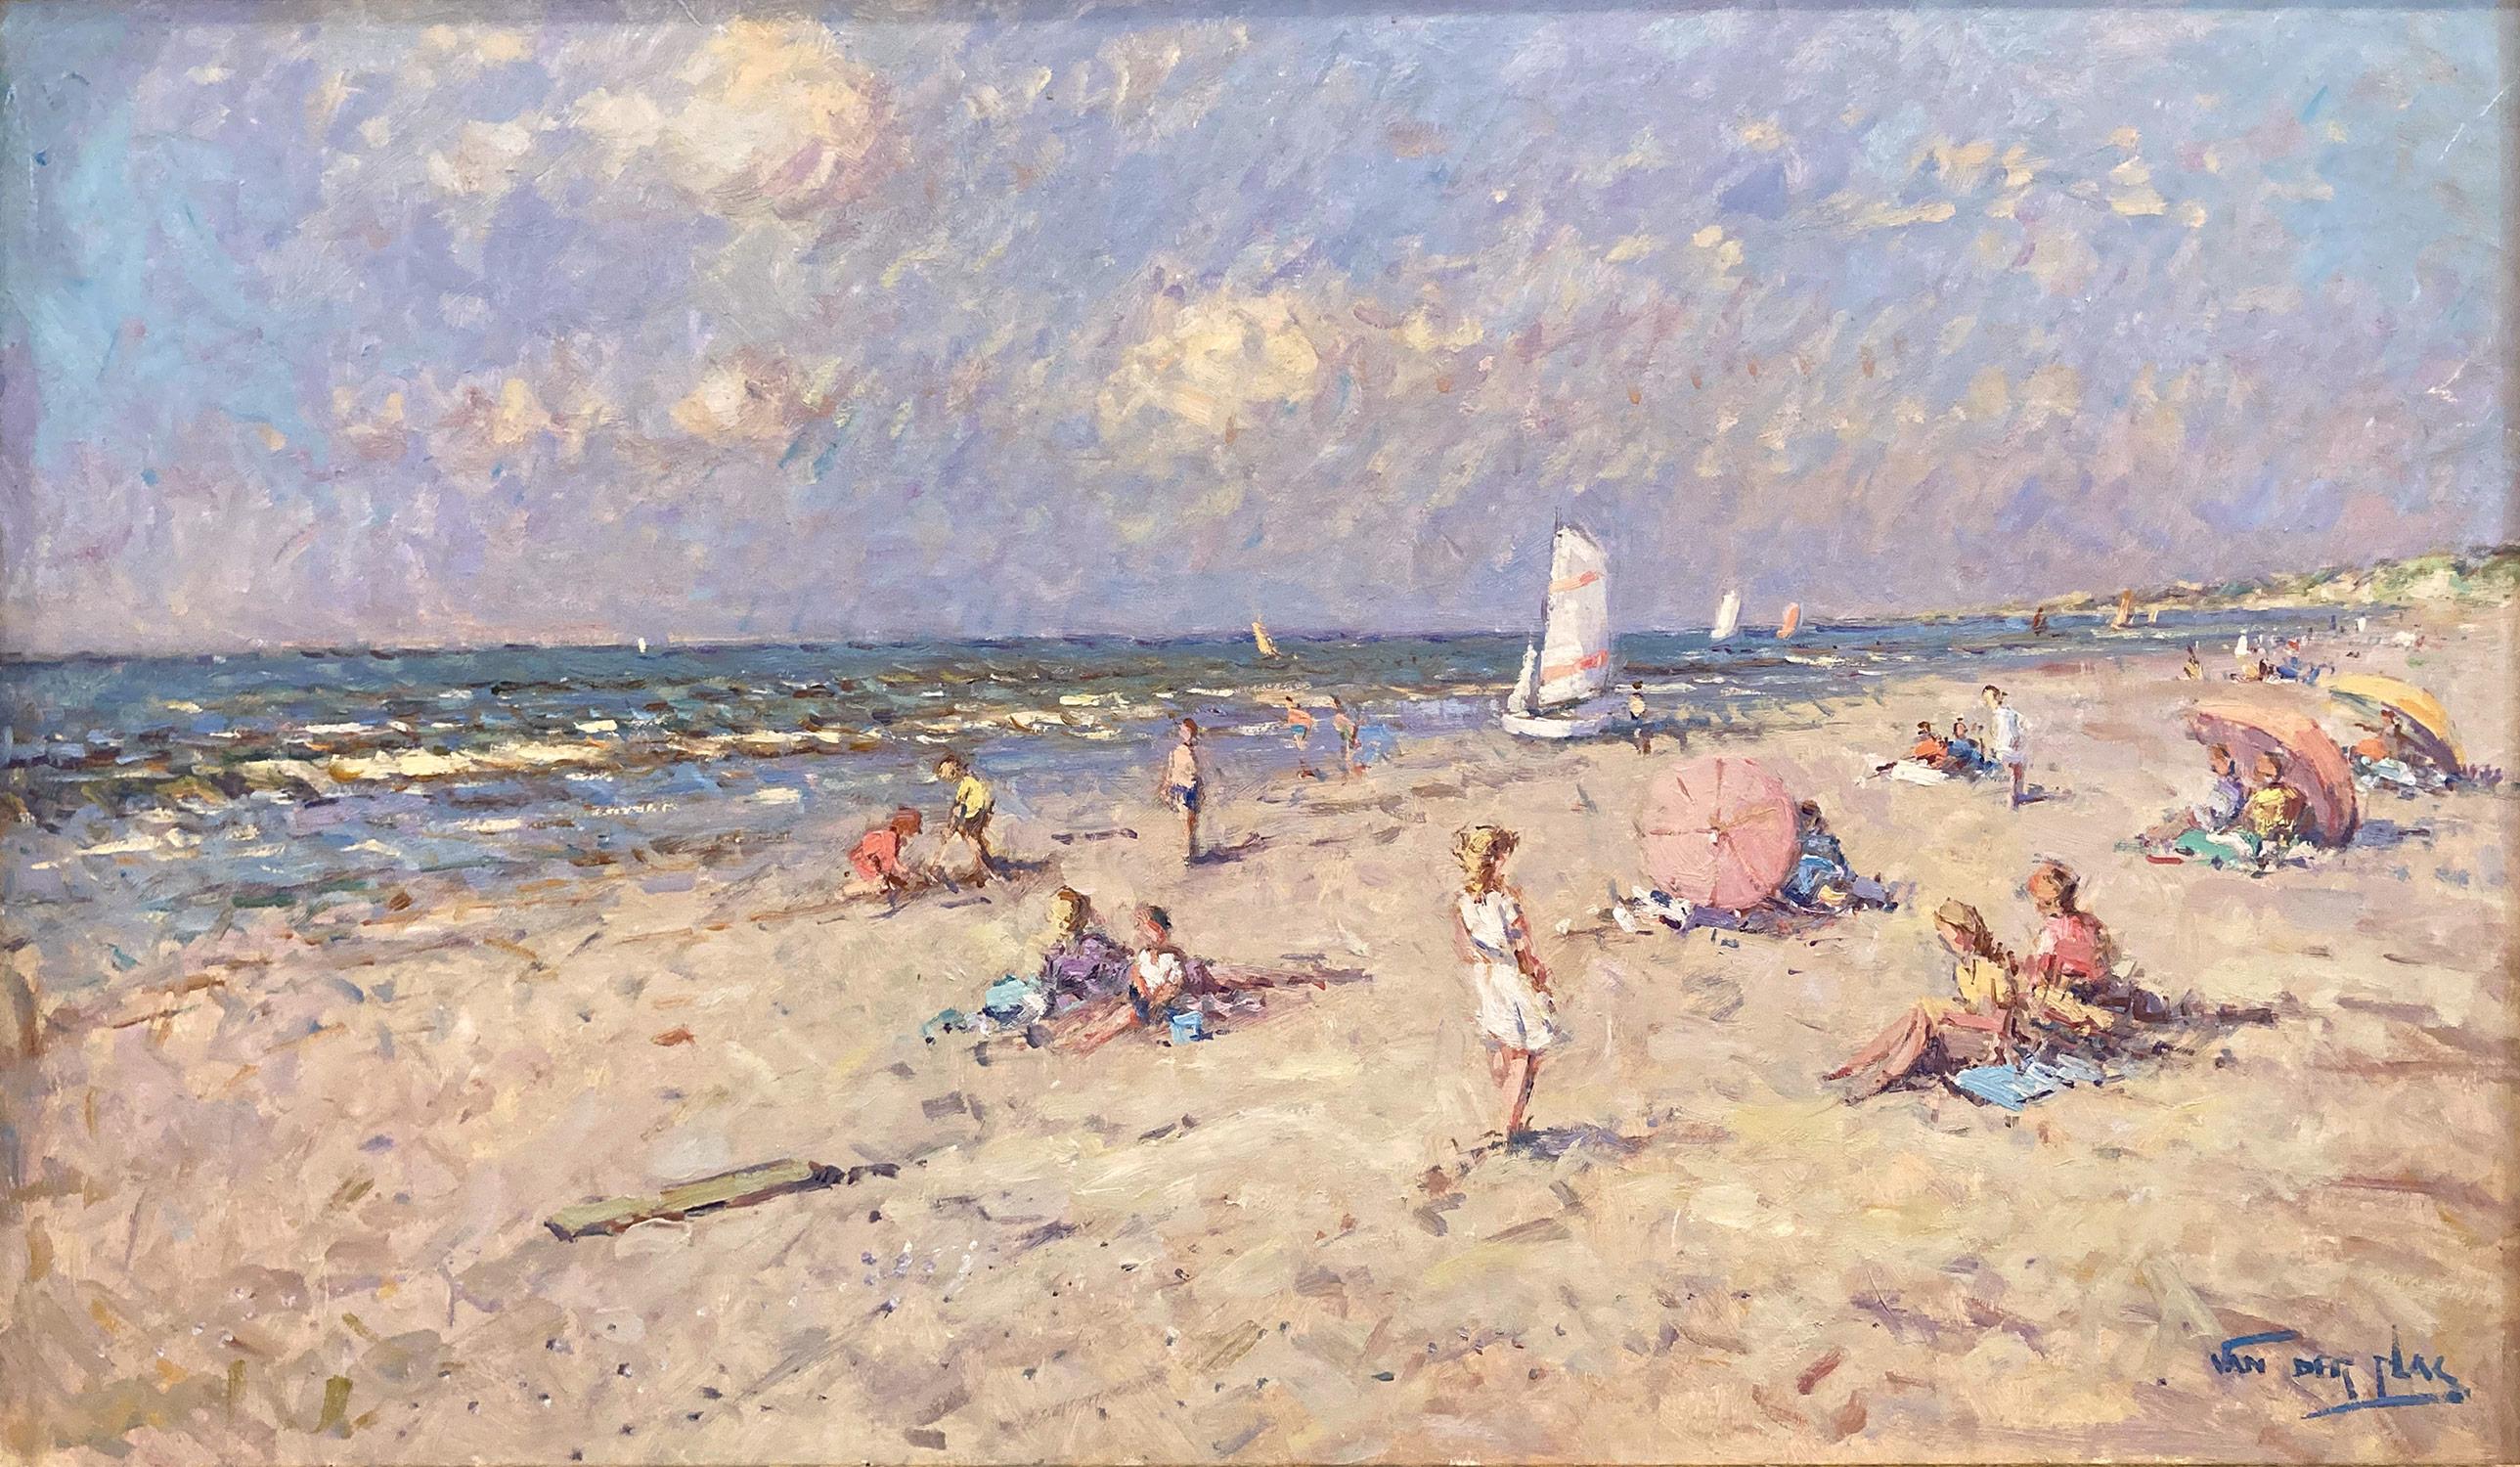 This captivating summer day beach scene is a remarkable display of Van der Plas's true passion for outdoor genre paintings. A wonderfully rich beach scene executed in the 21st Century depicting figures and umbrellas in the sand with Sailboats in the